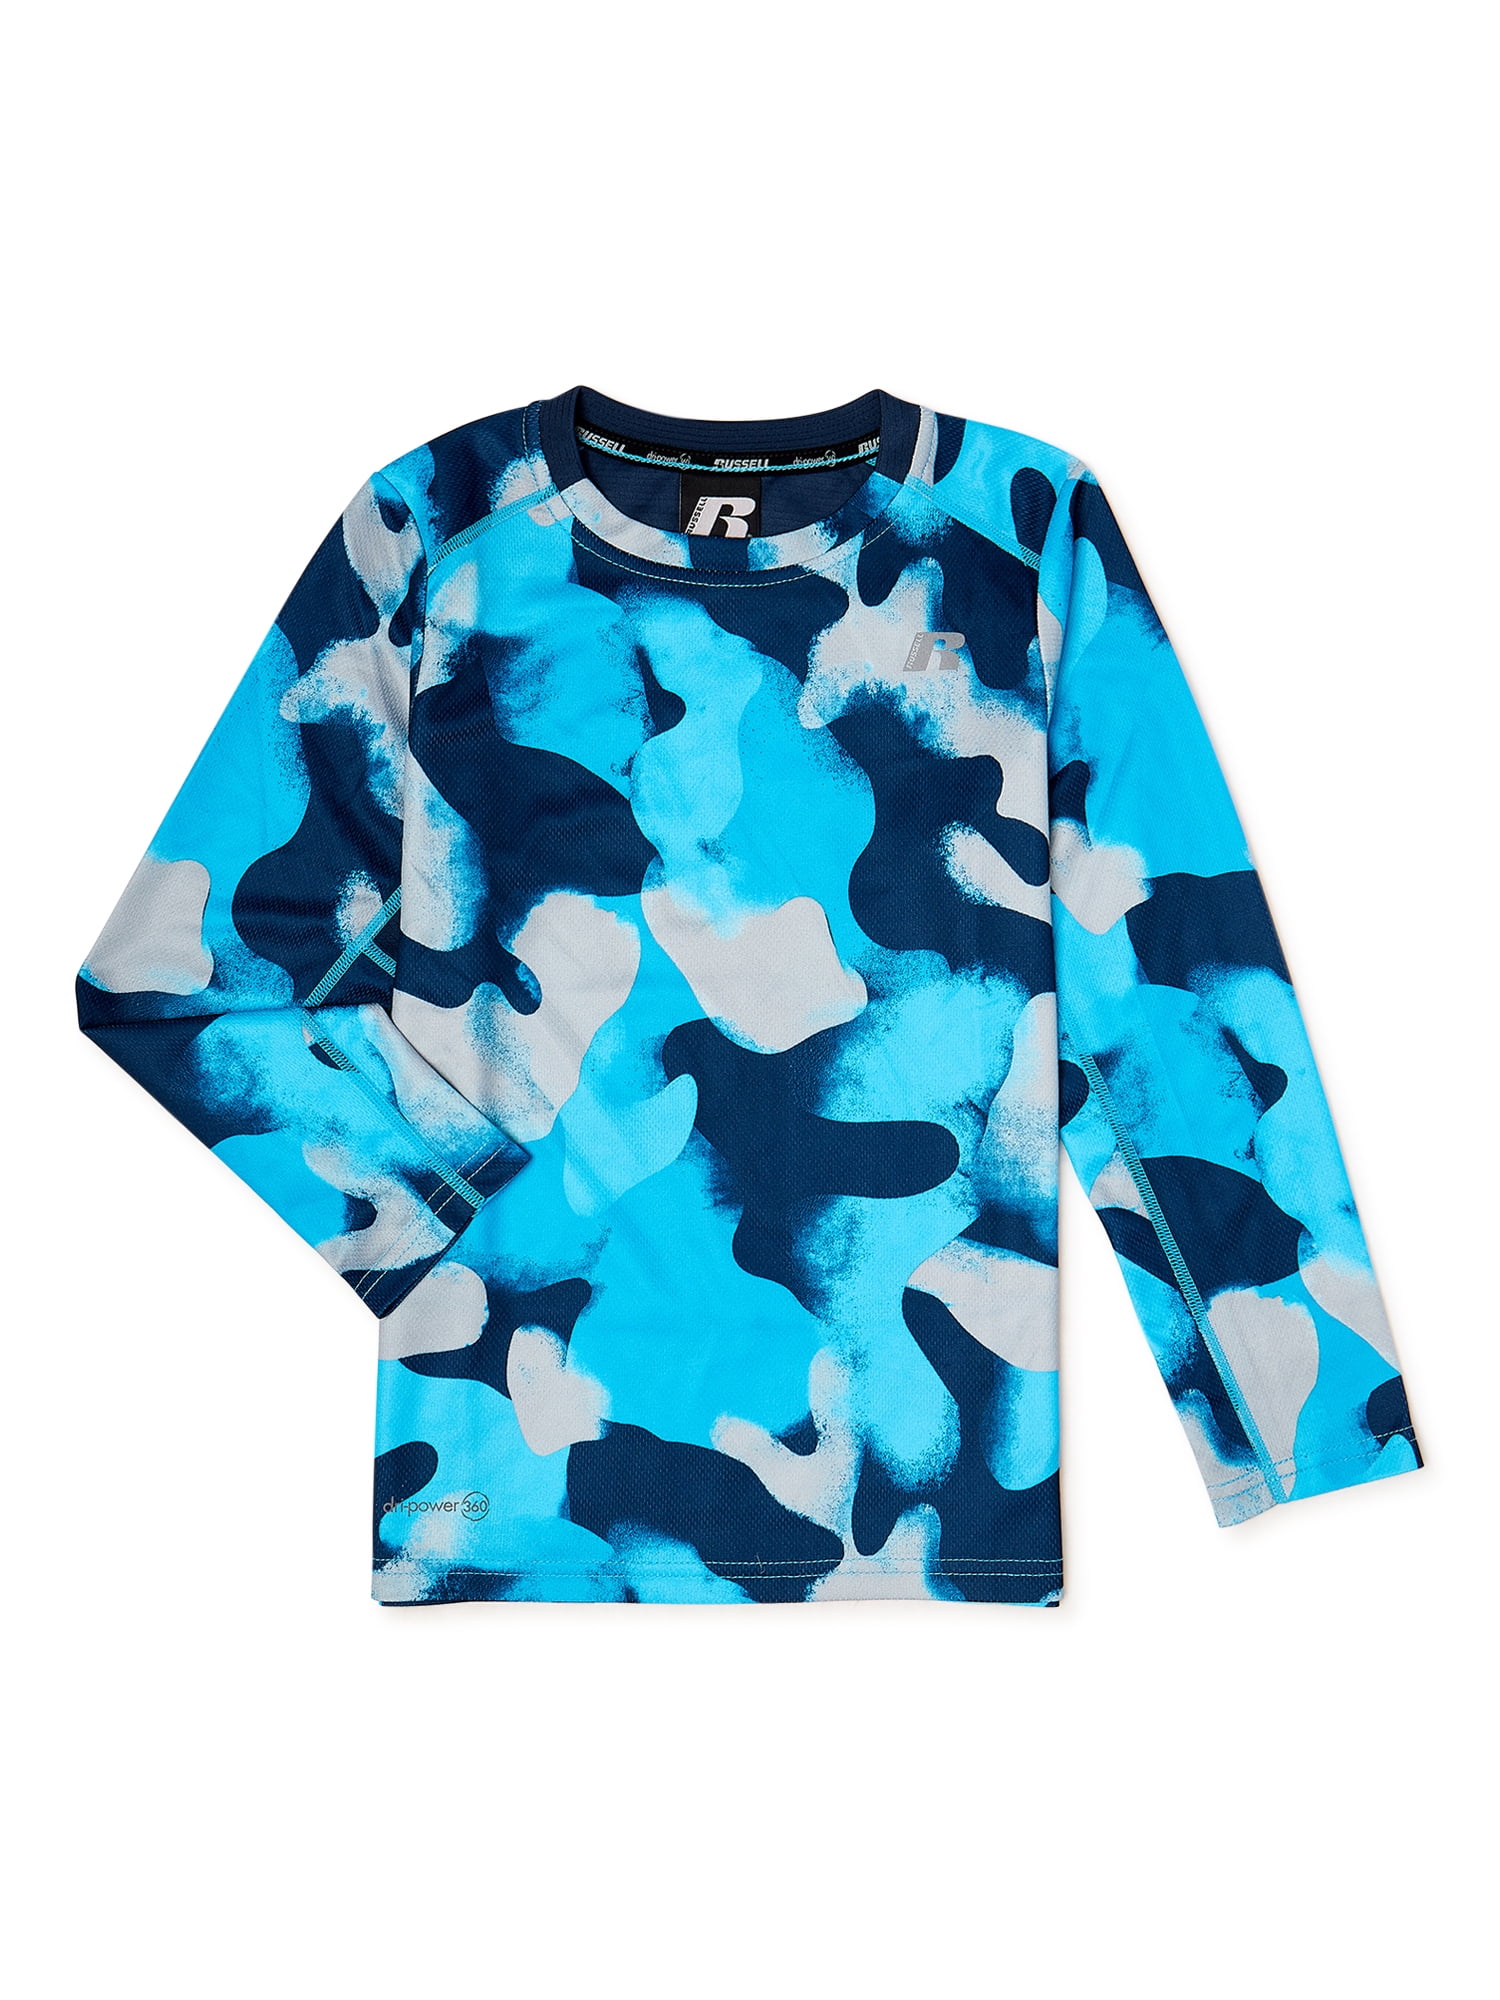 Russell Camo Boys Long Sleeve Printed T-Shirt, Sizes 4-18